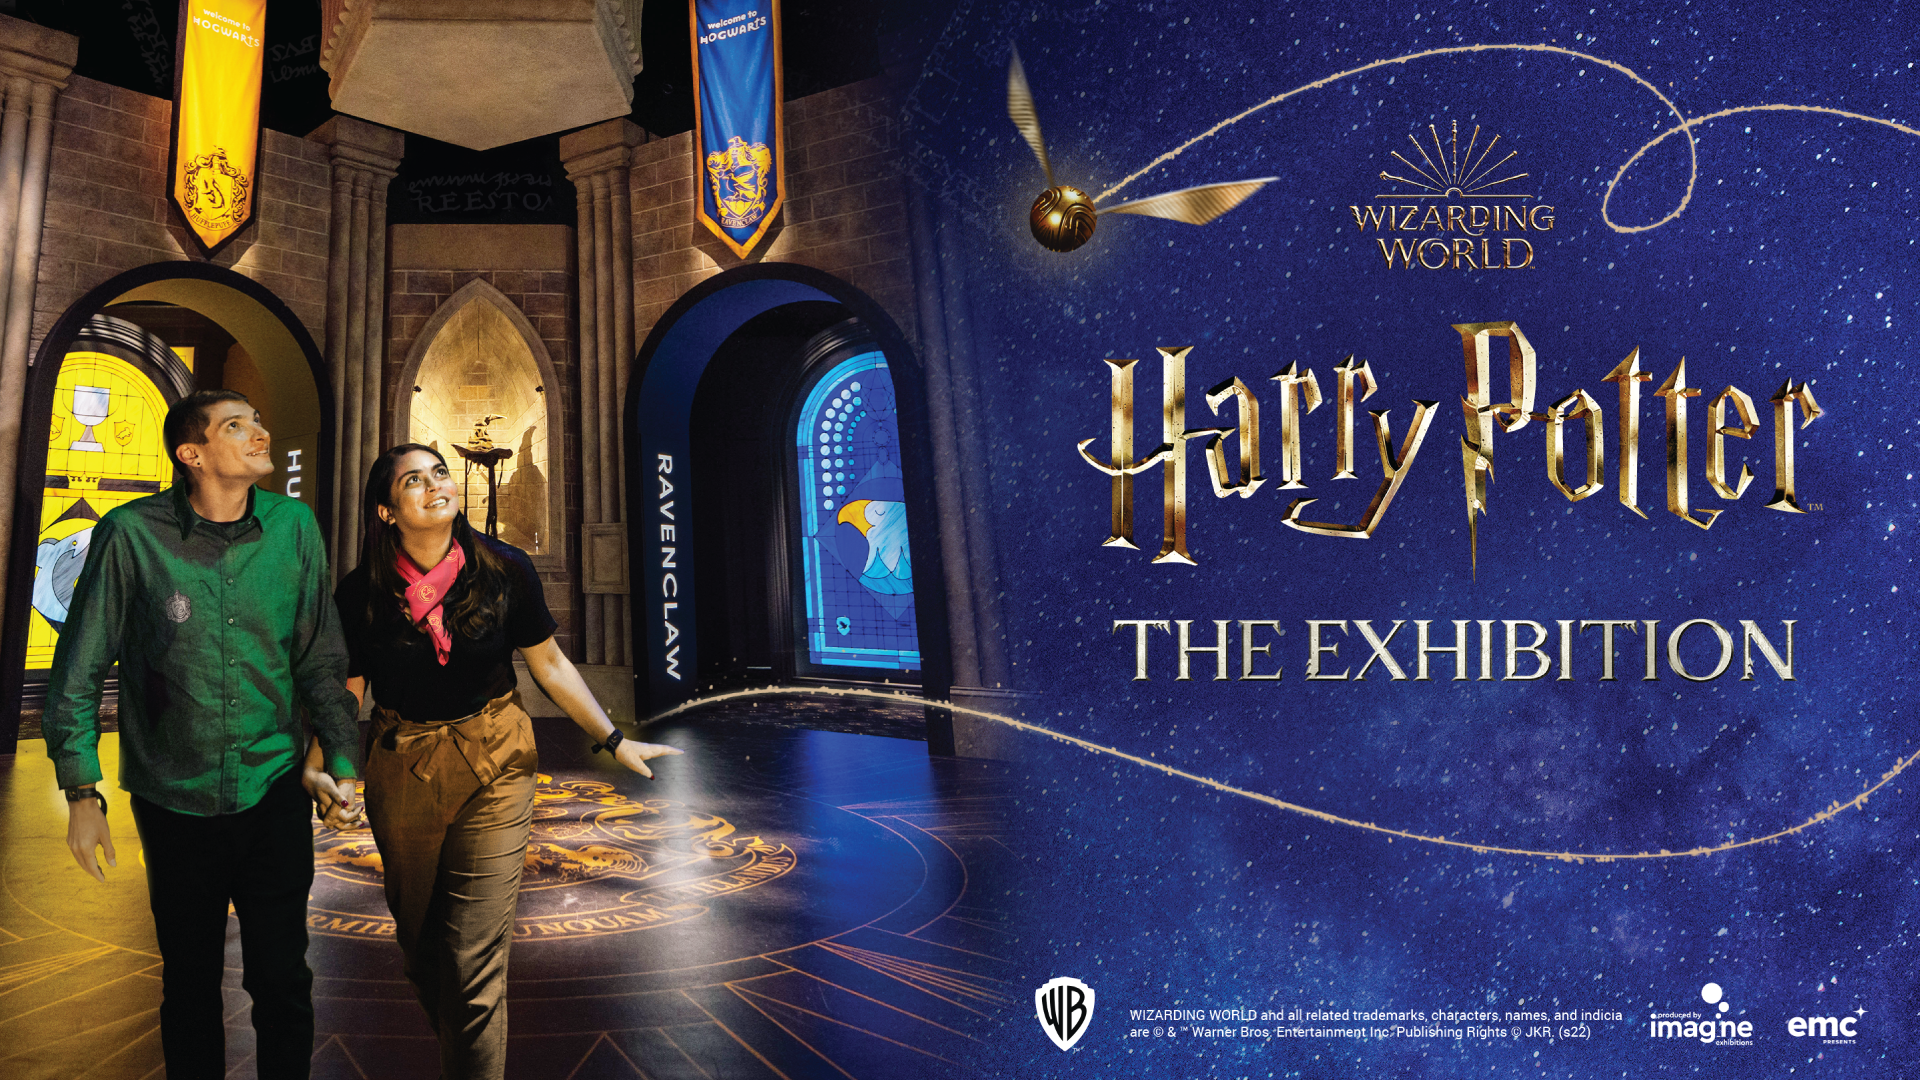 Great news for Harry Potter fans - HARRY POTTER: THE EXHIBITION Opens one day earlier!